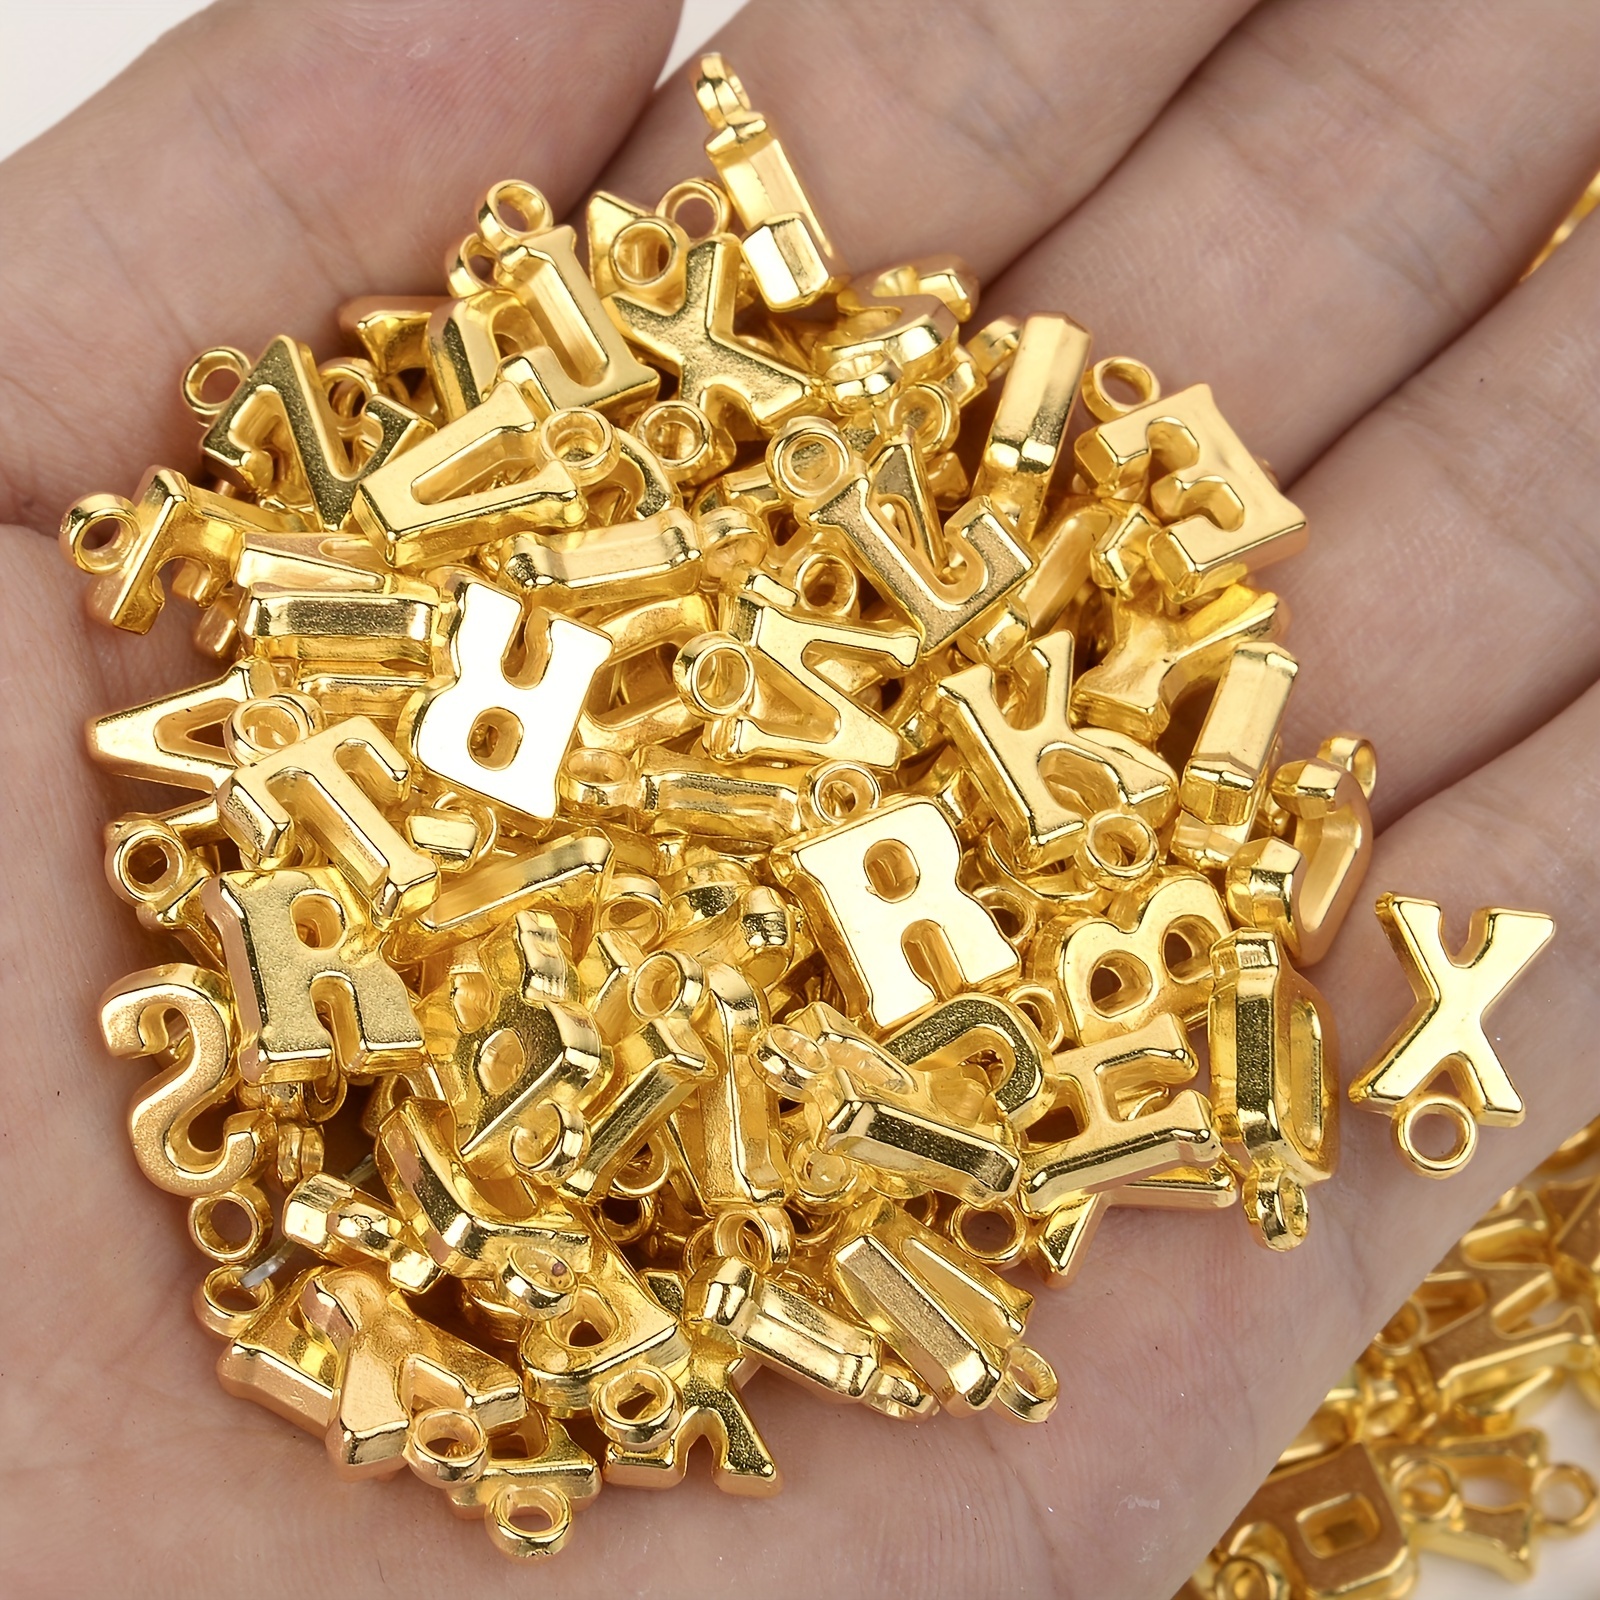 50-100pcs Acrylic Alphabet Letter Beads Plastic Letters Space Bead Jewelry  Makin